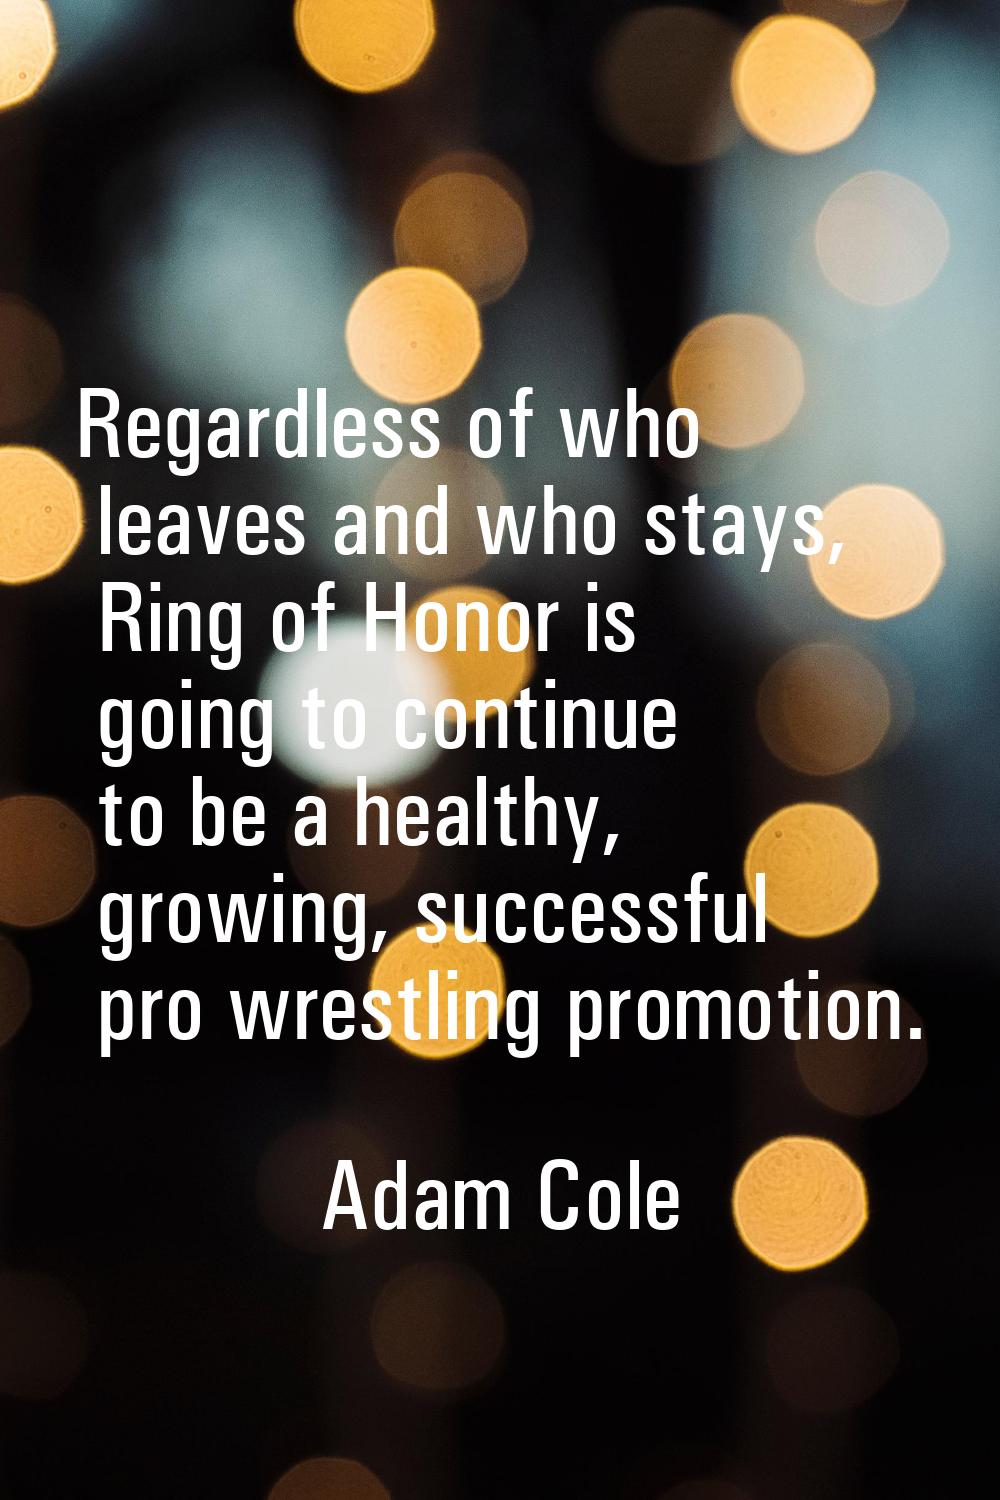 Regardless of who leaves and who stays, Ring of Honor is going to continue to be a healthy, growing